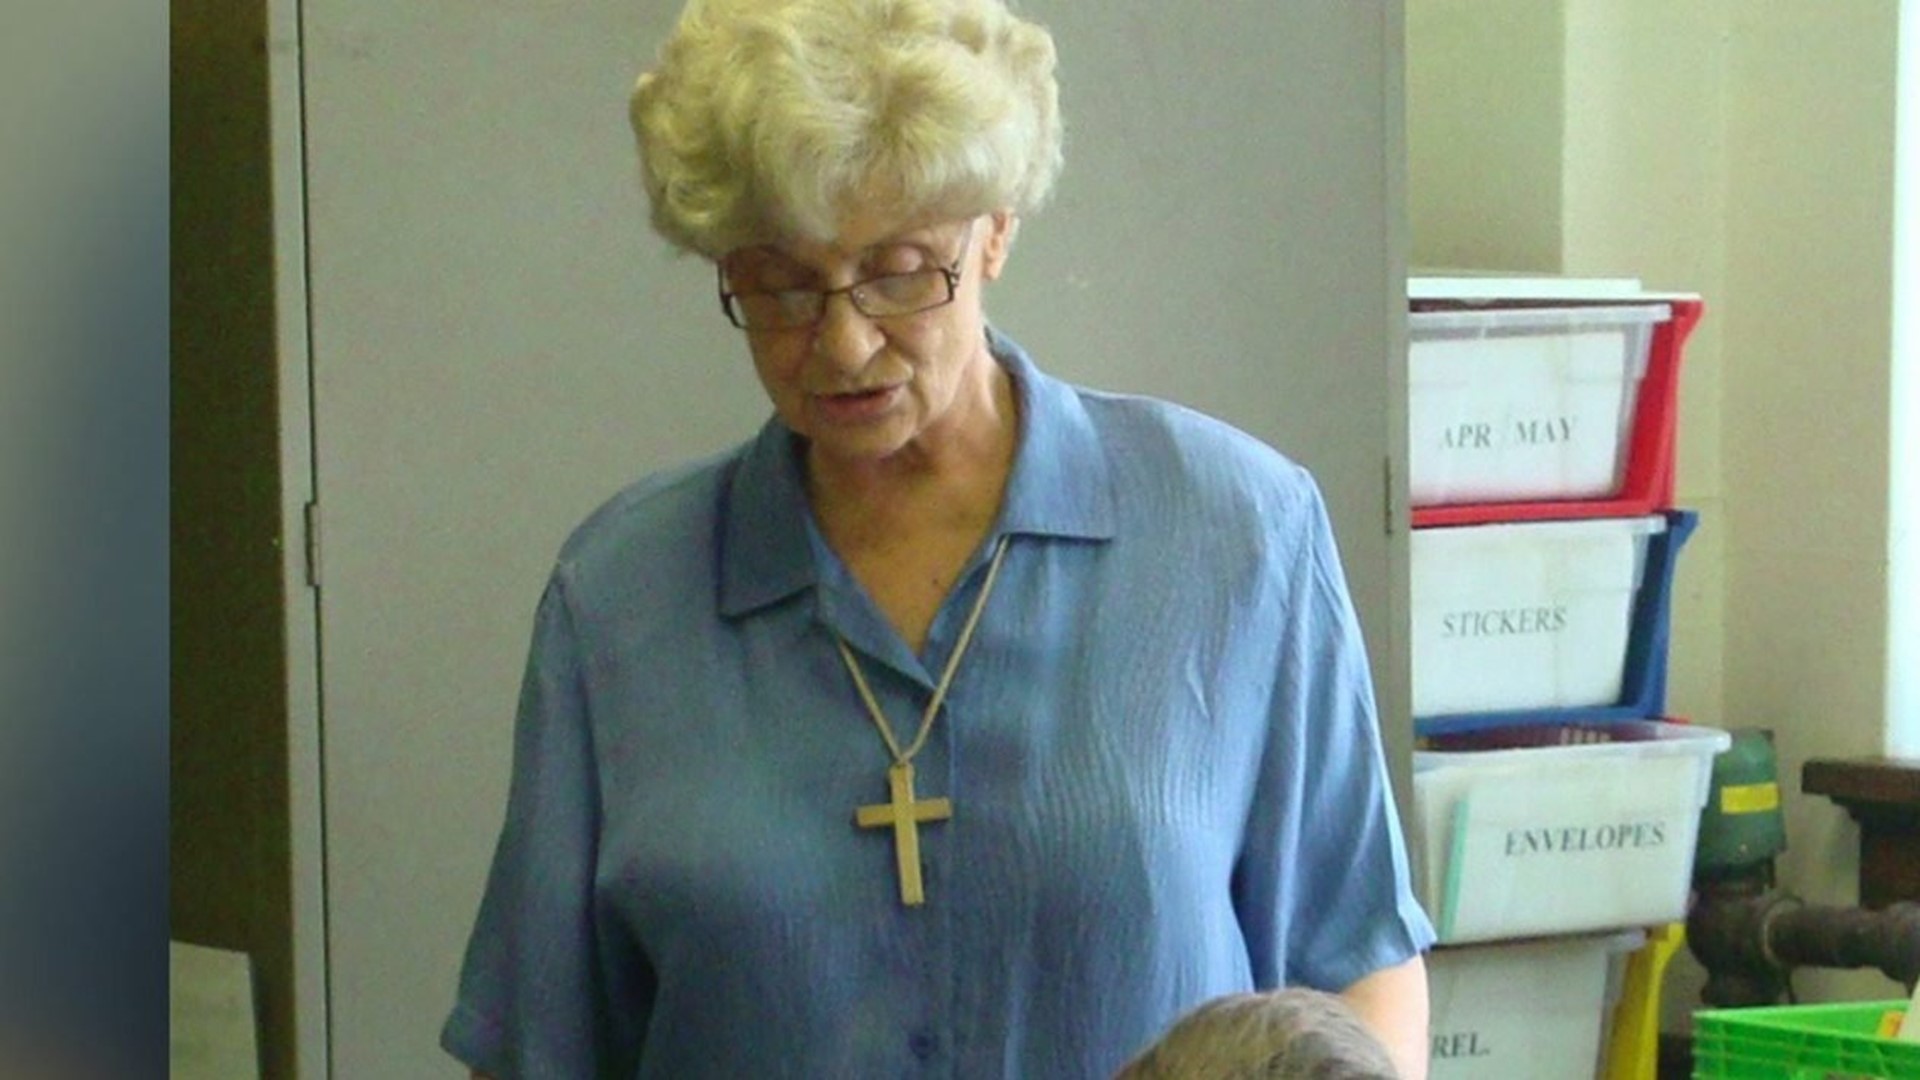 Police believe Sister Angela Miller was killed by her nephew, Alan Smith, in April 2018.